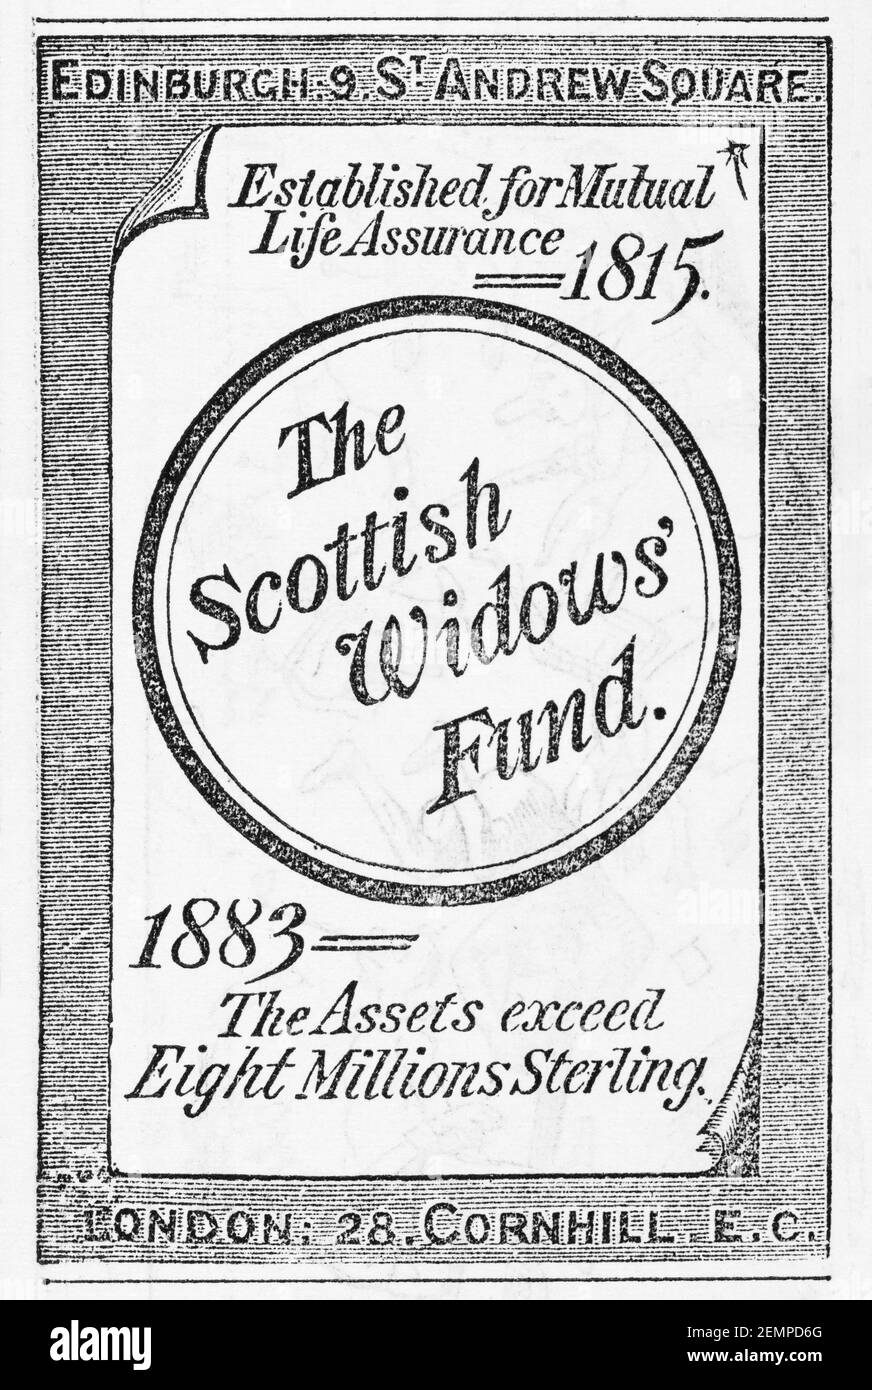 Old Victorian magazine newsprint Scottish Widows financial advert from 1883 - before the dawn of advertising standards. Financial advertising history. Stock Photo